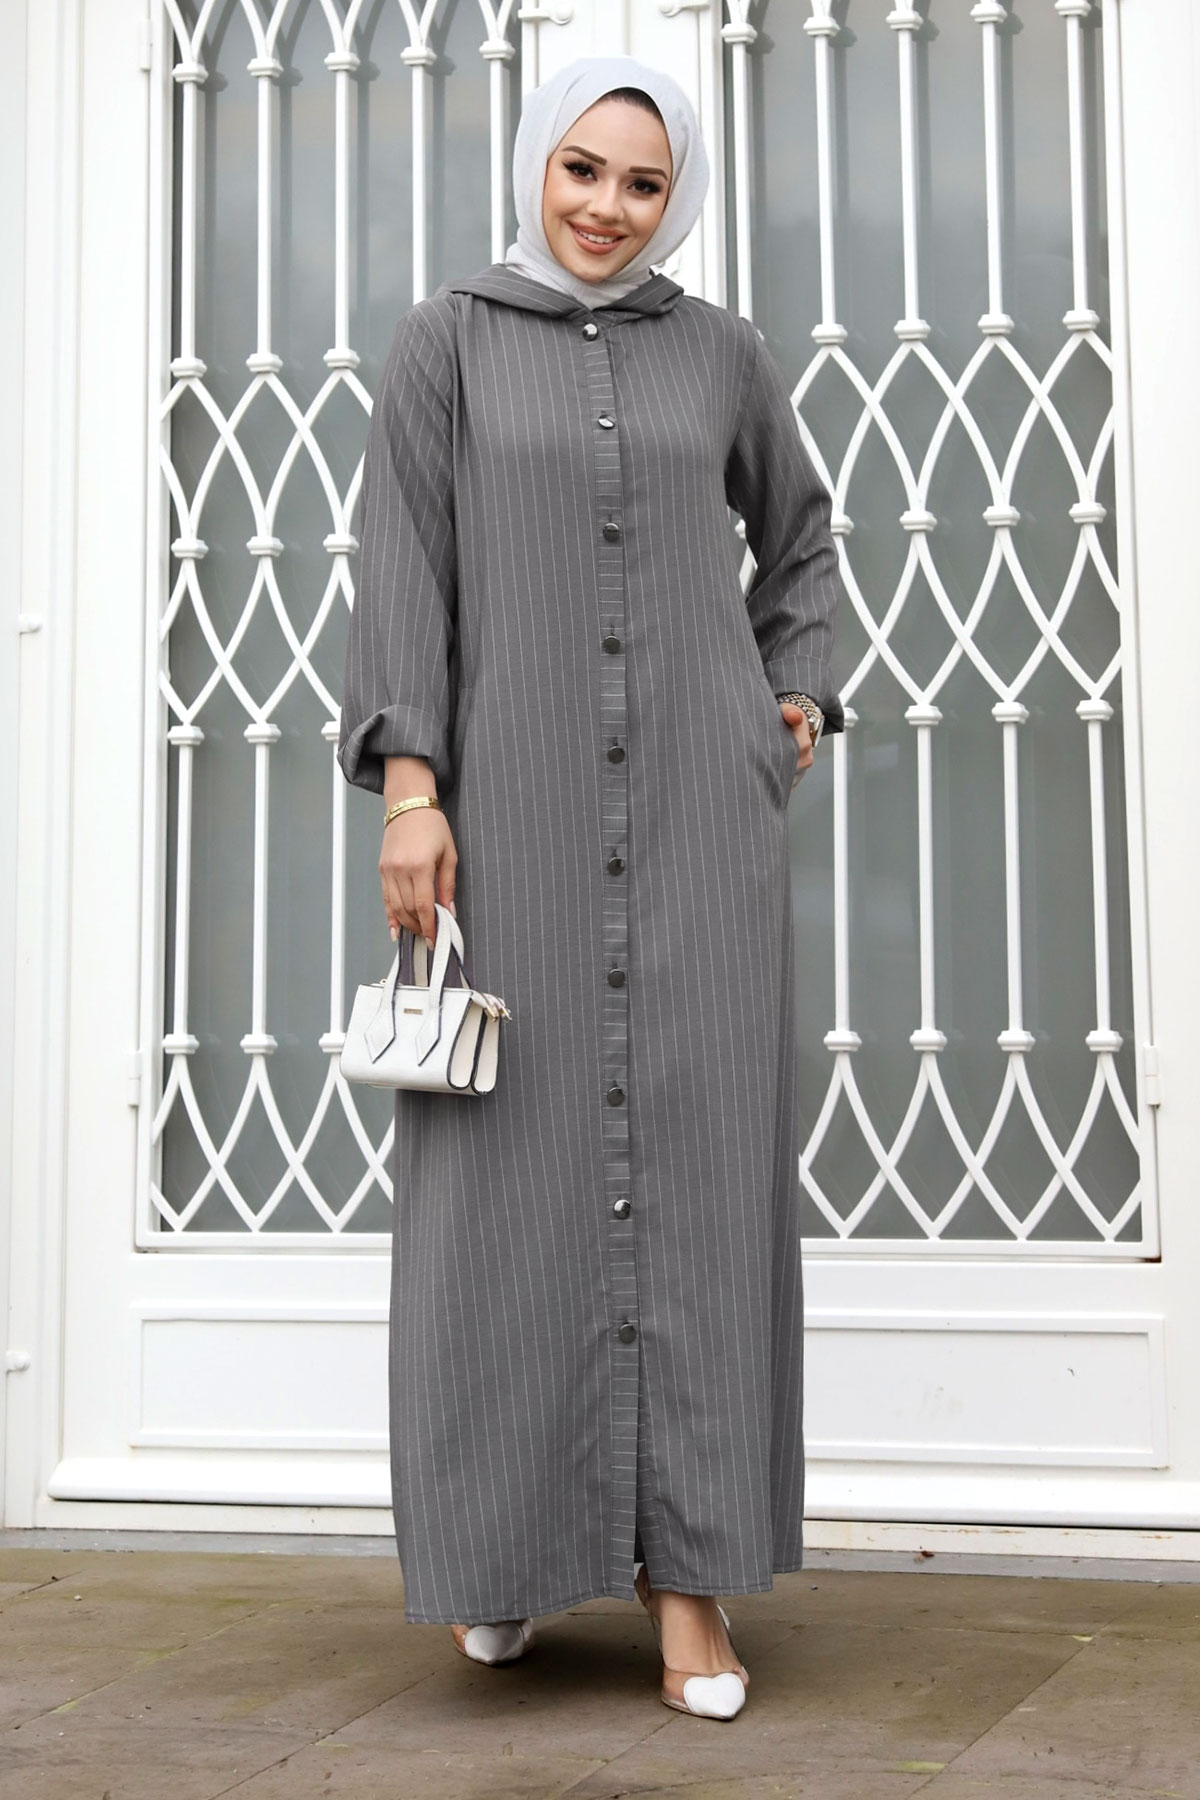 baggy clothes with hijab